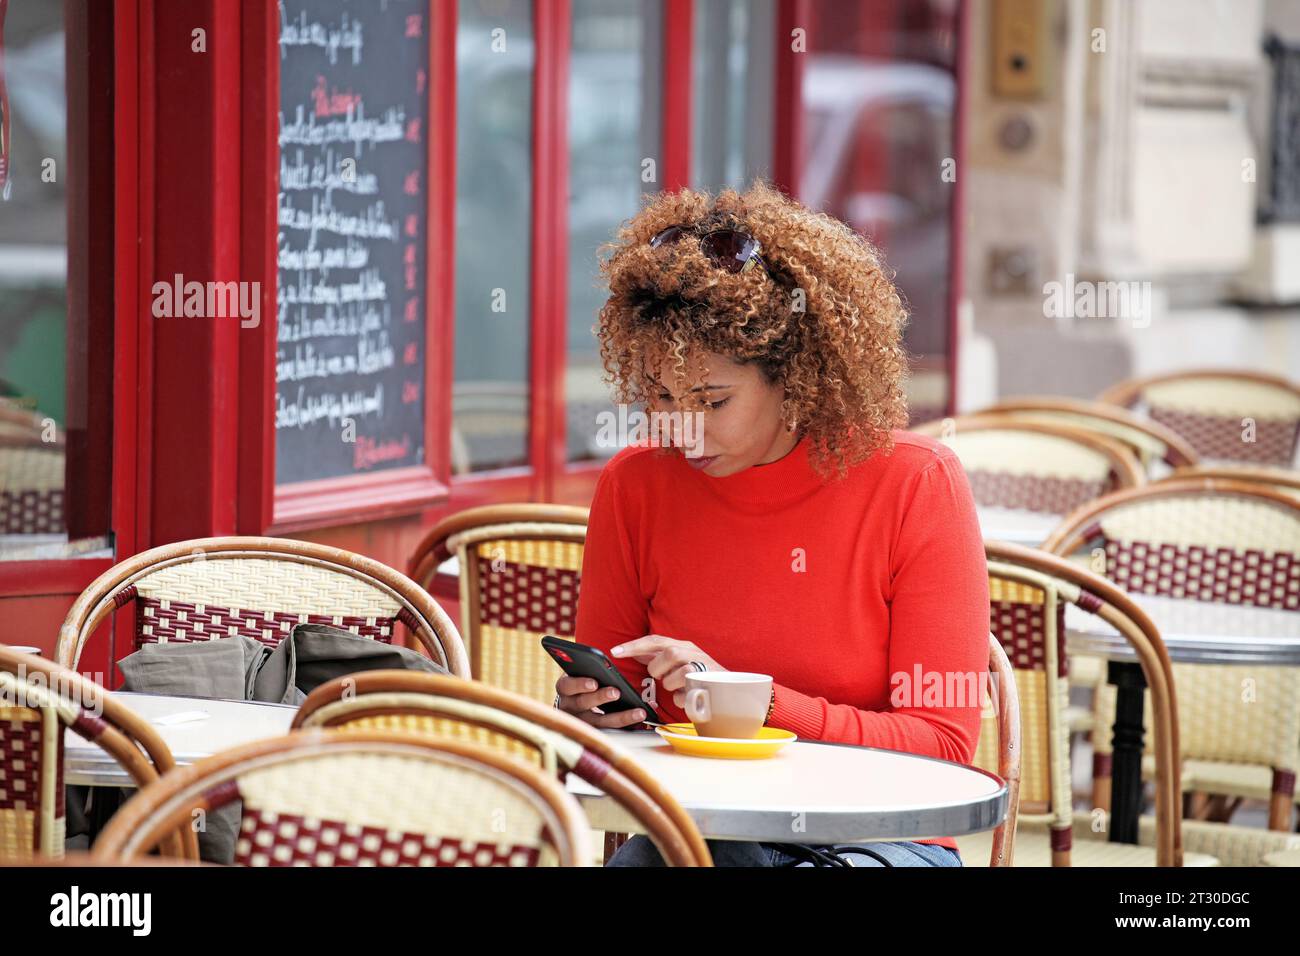 CURLY HAIR WOMAN IN RED SWEATER CHECKING HER PHONE ON A CHAIR OUTDOOR OF A COFFEE PLACE IN PARIS Stock Photo